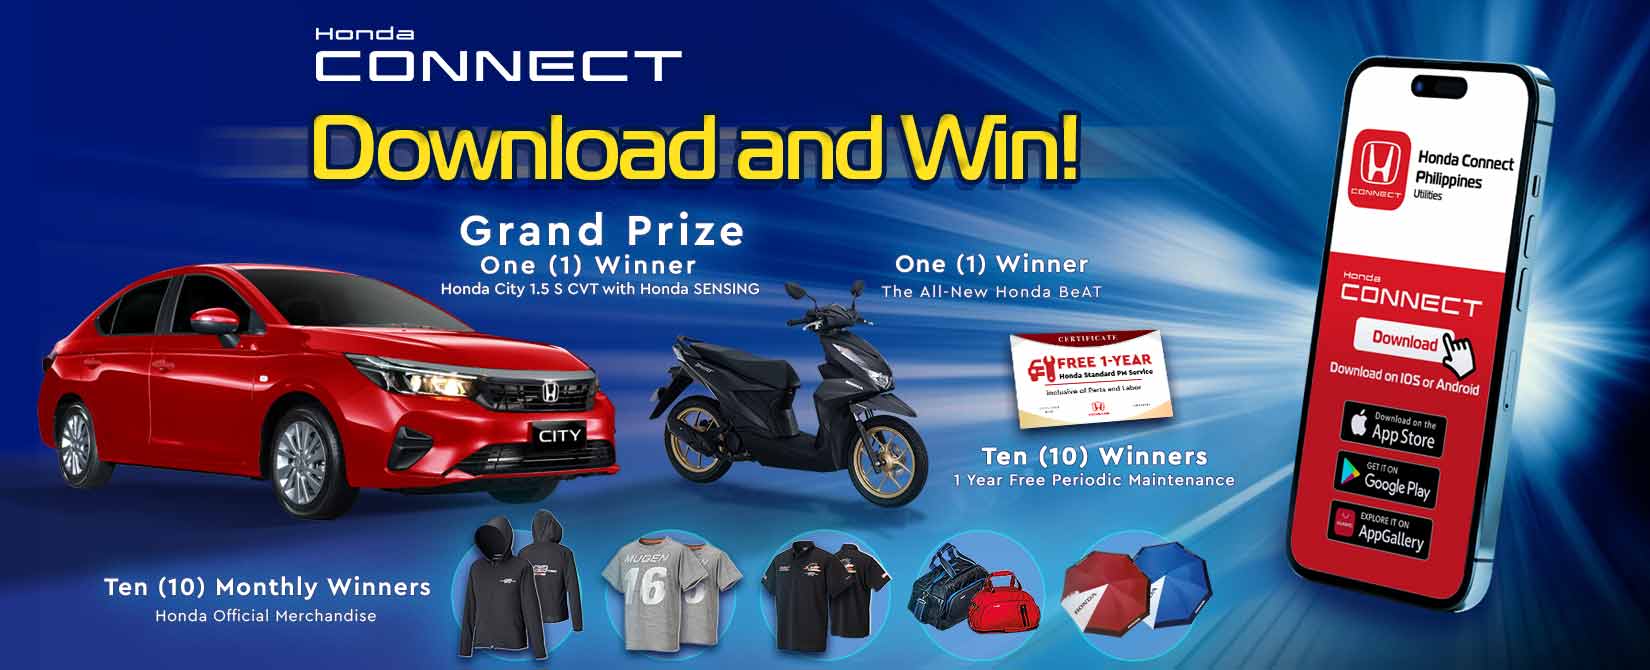 Honda CONNECT App: Download and Win